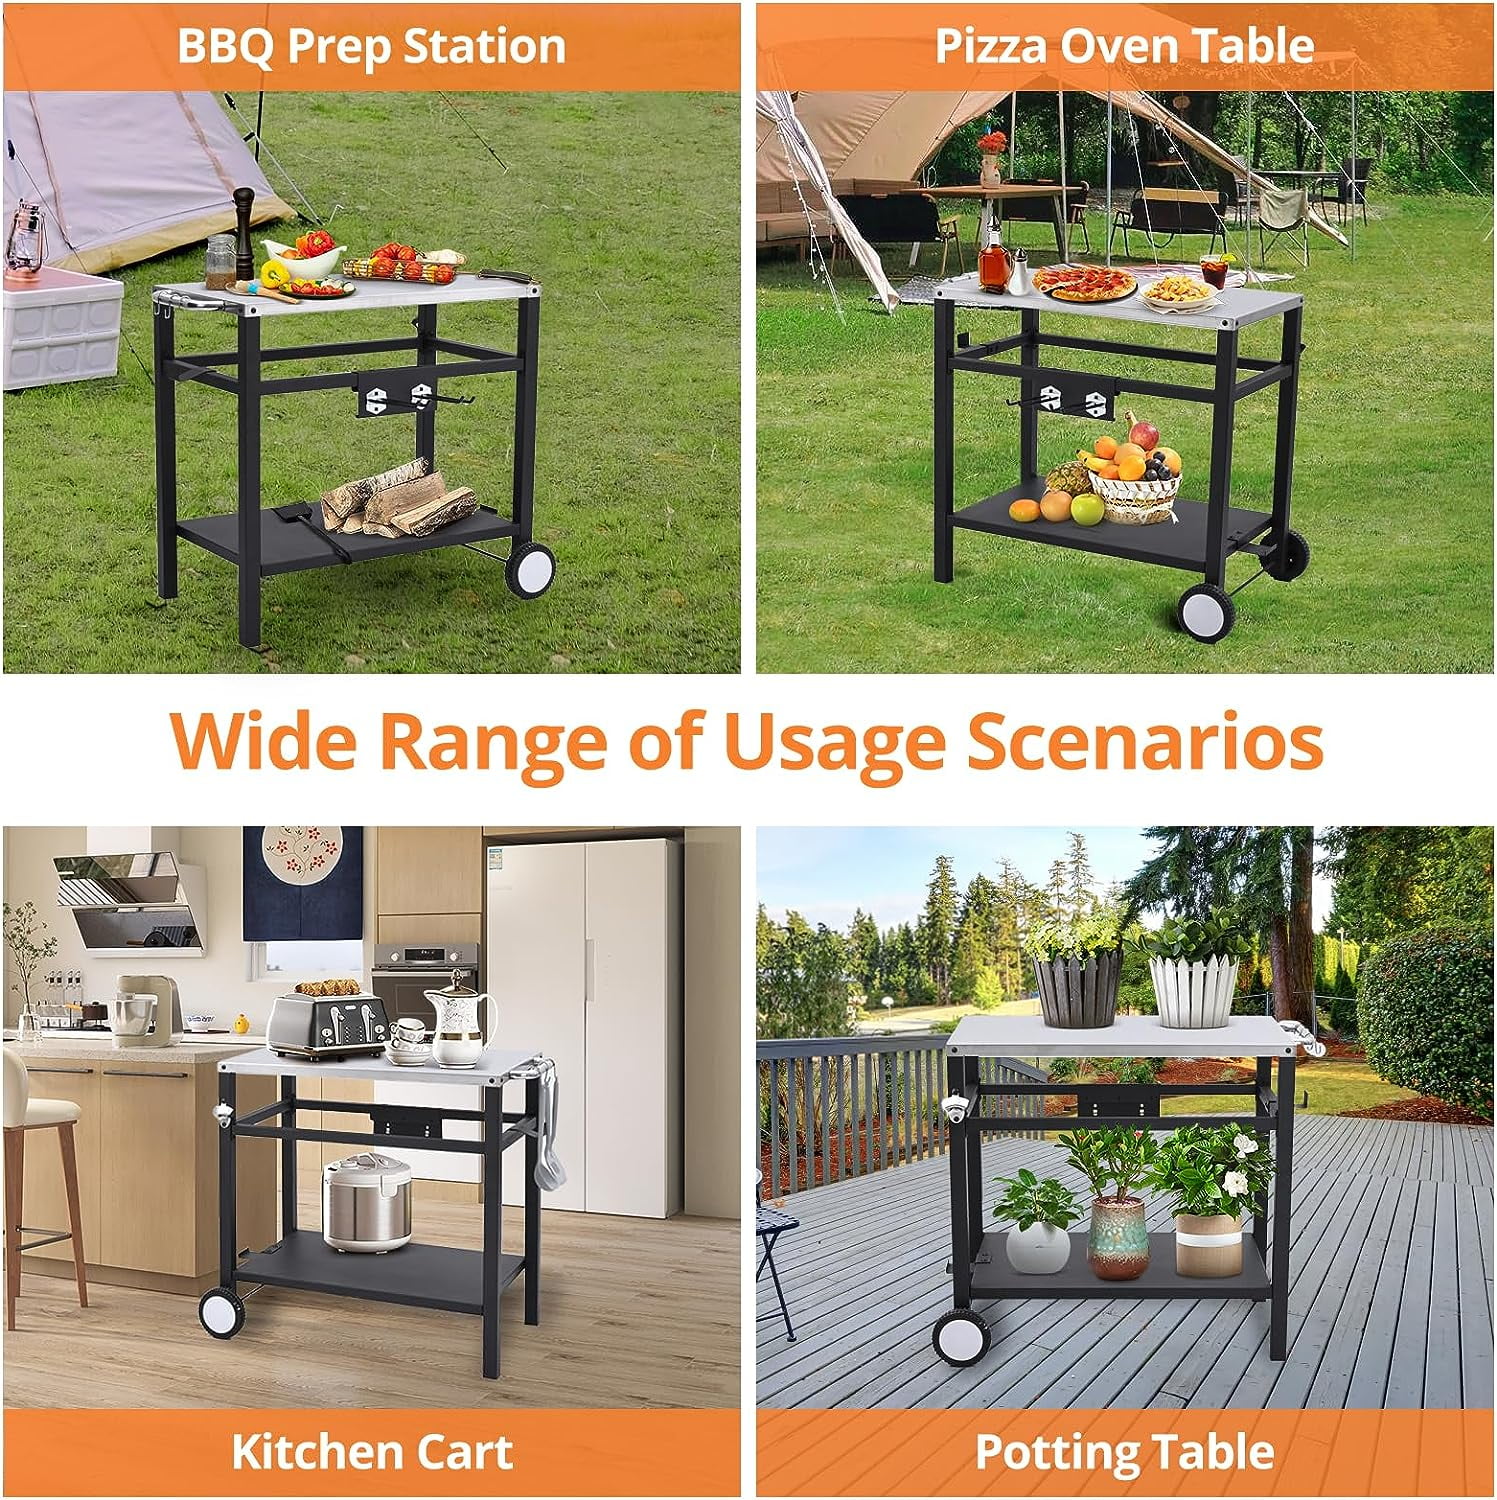 Patio Prep Table BBQ Grill Kitchen Island Bar Carts for Outdoor Griddle  Cooking